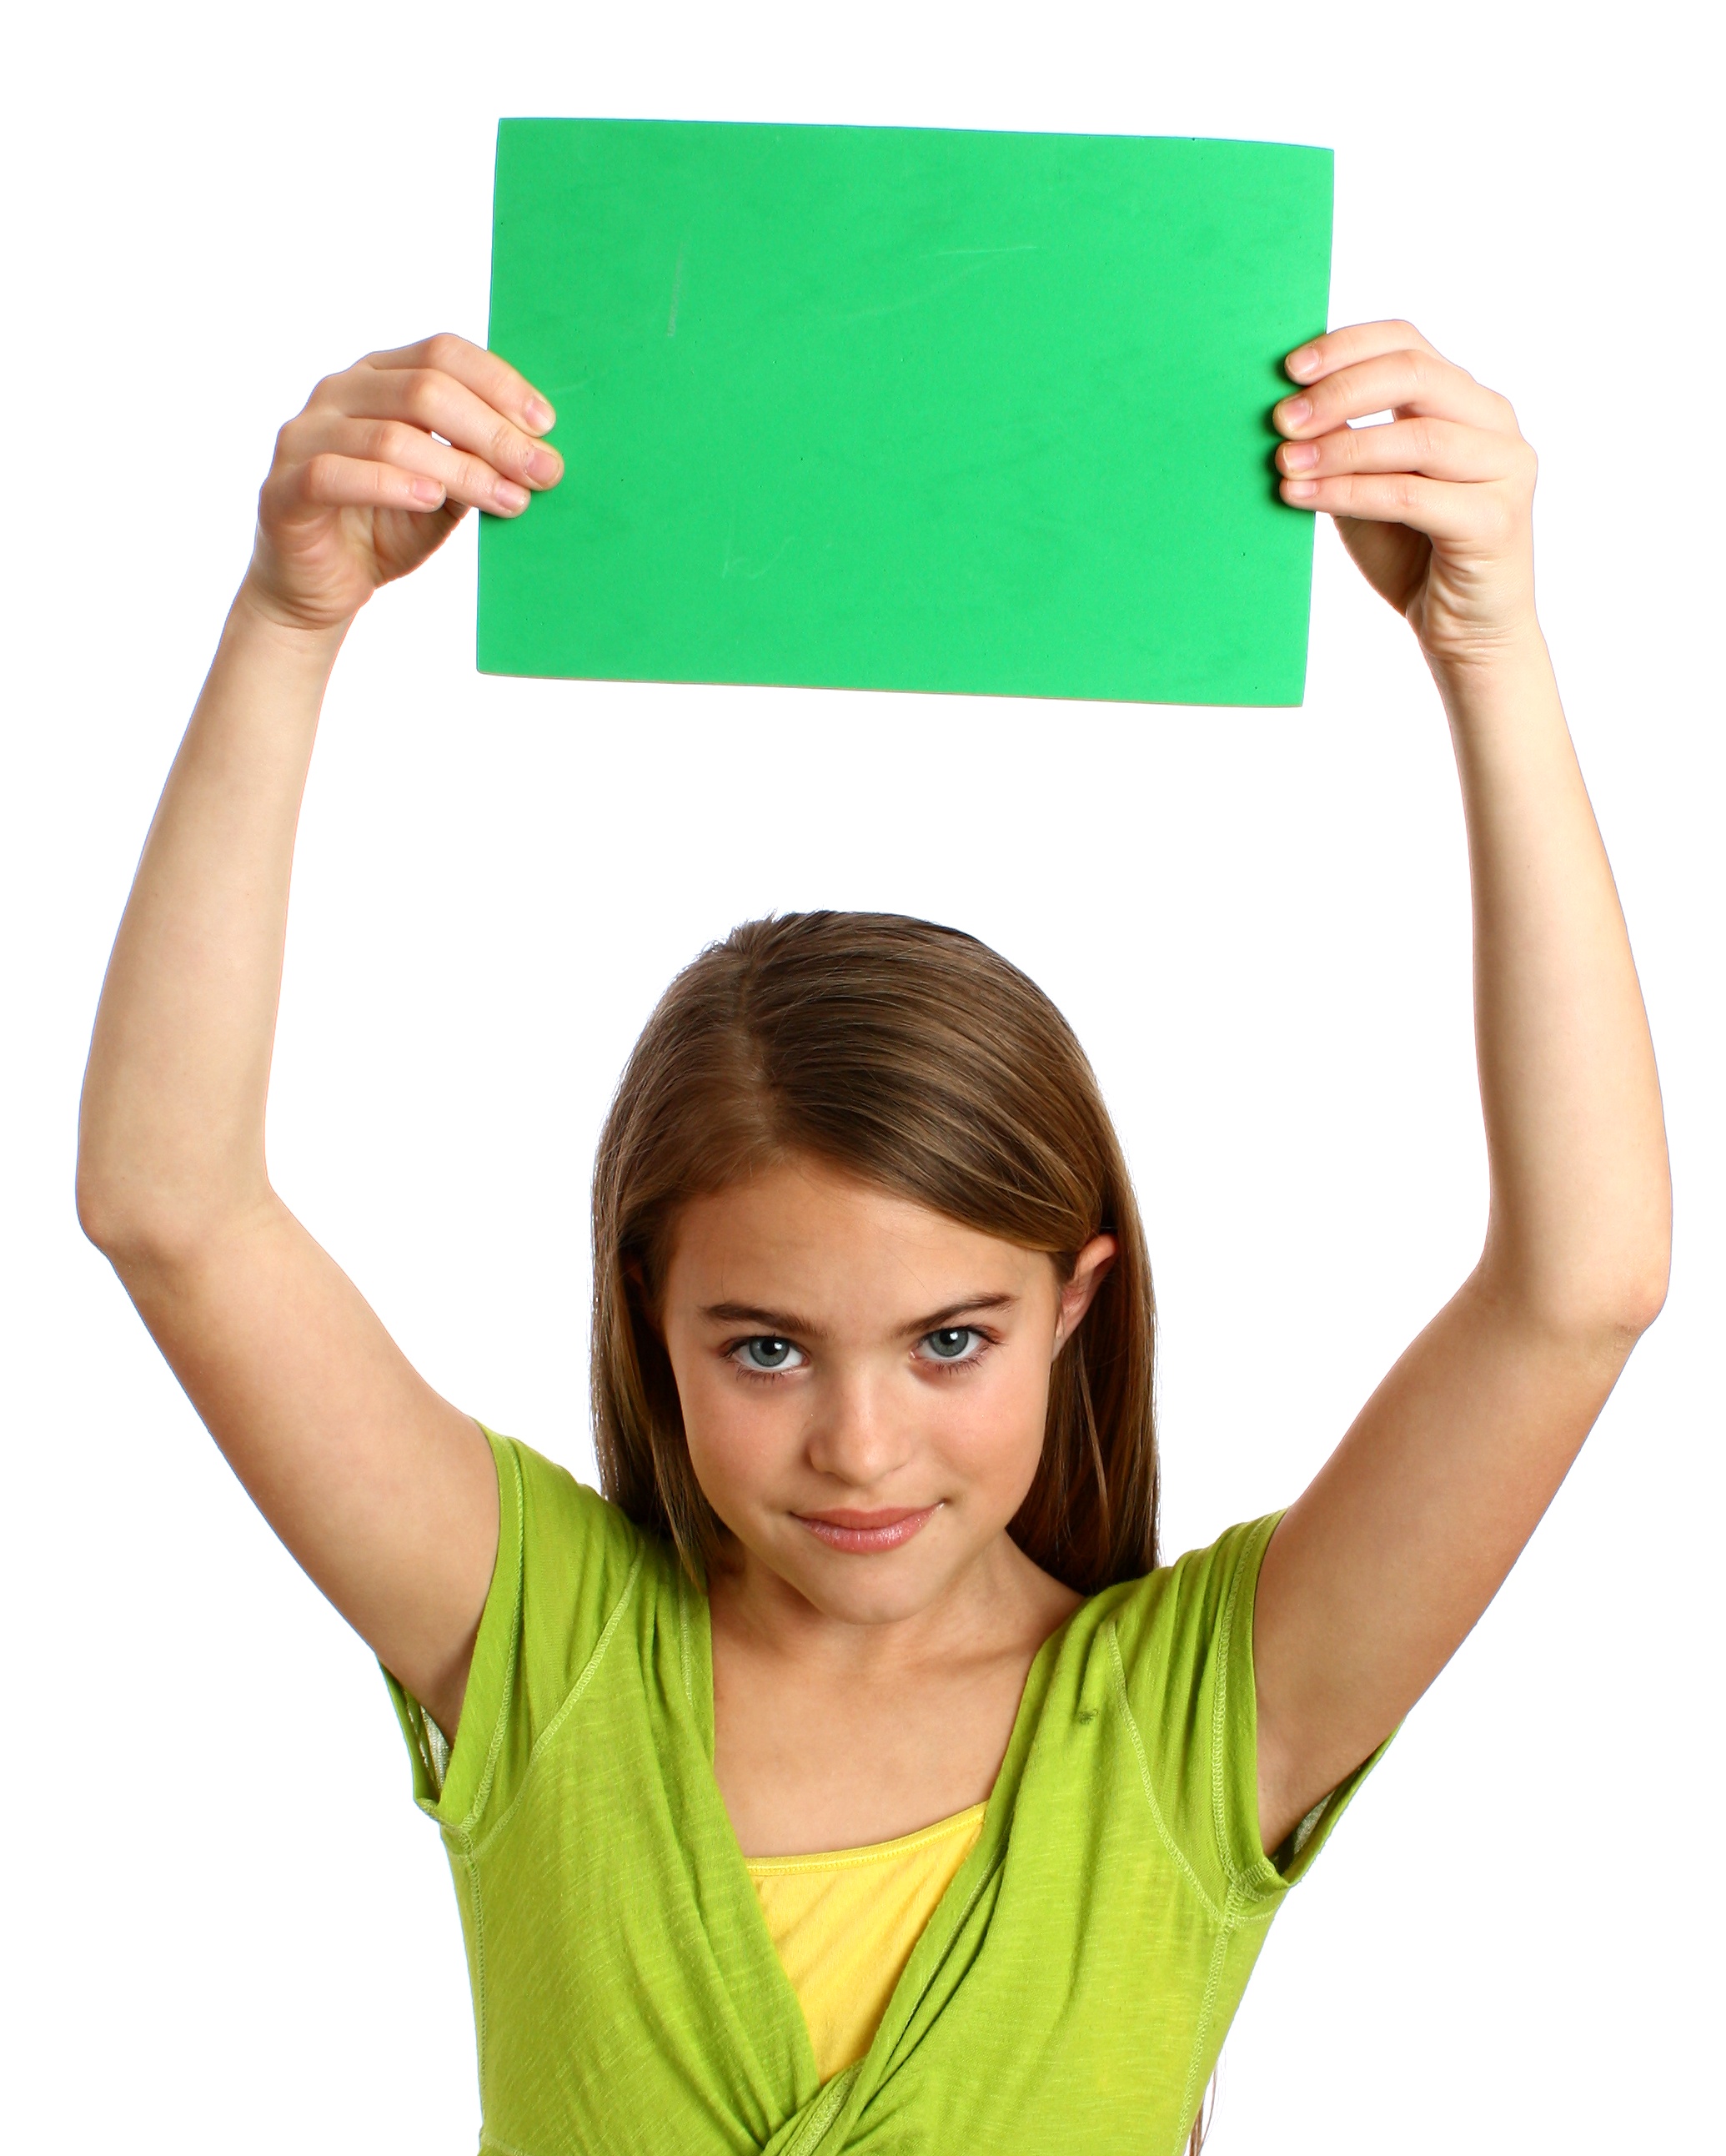 Young girl holding a blank green sign photo